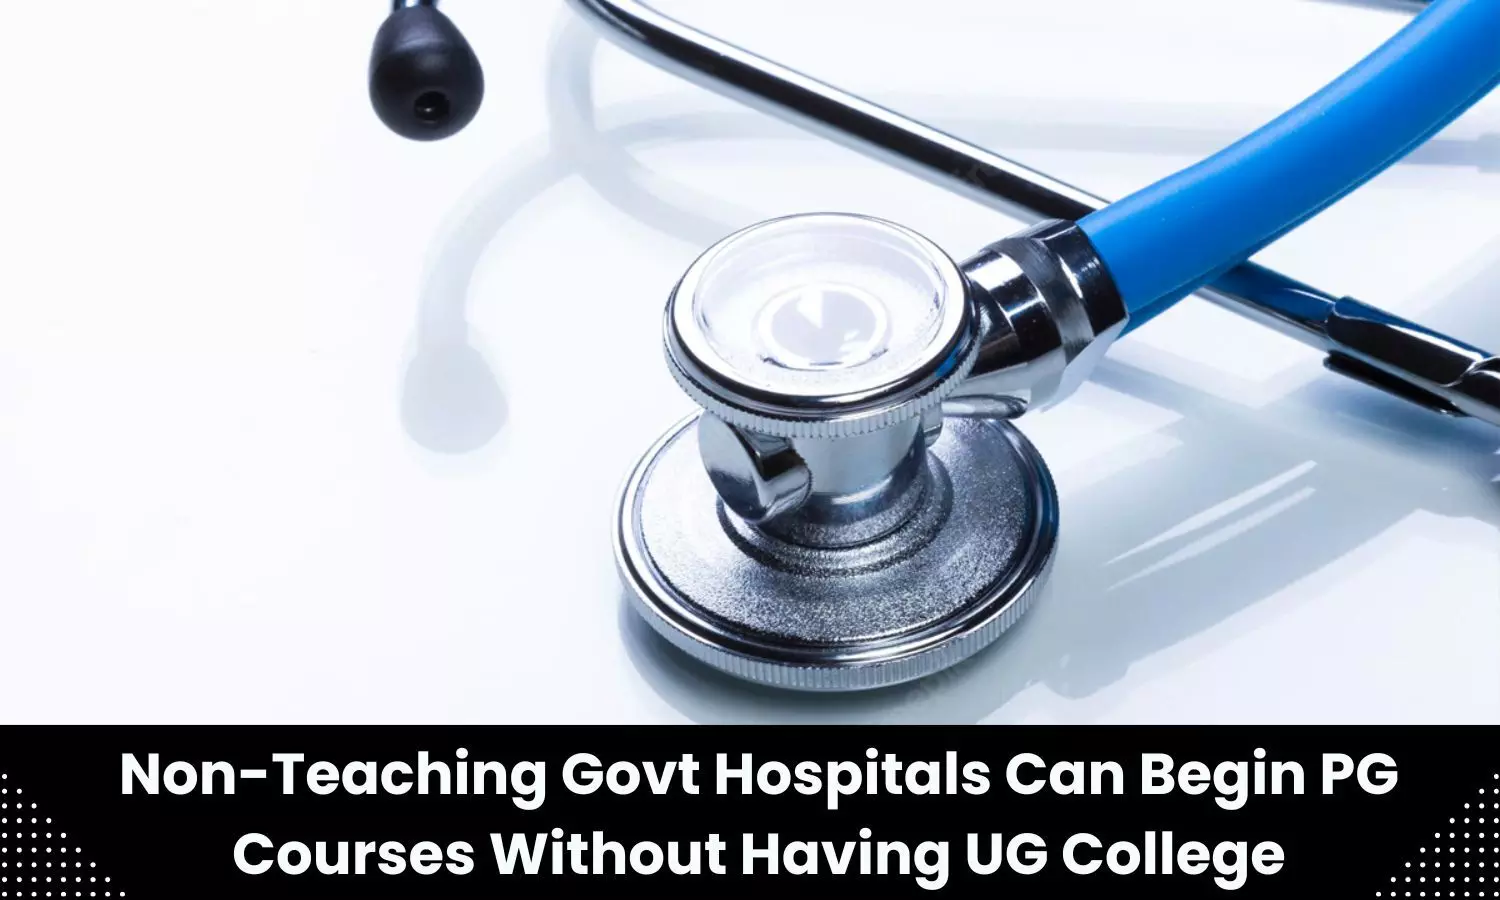 Non teaching govt hospitals can now start PG courses without having UG college